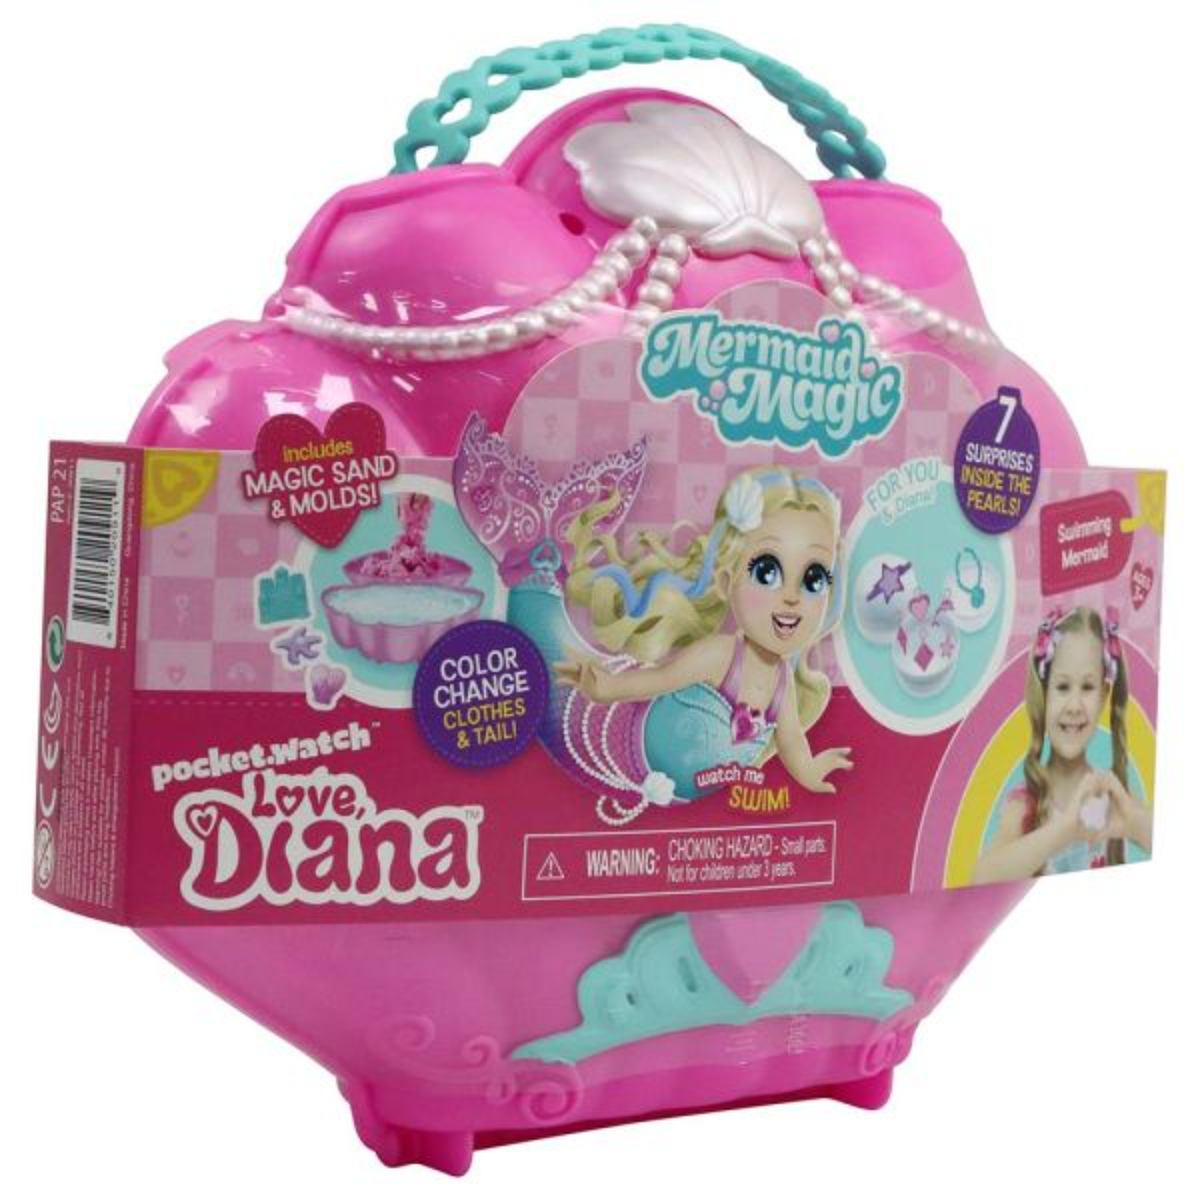 Love Diana  Mermaid Surprise Playset, 6 inches, Pink, 20911